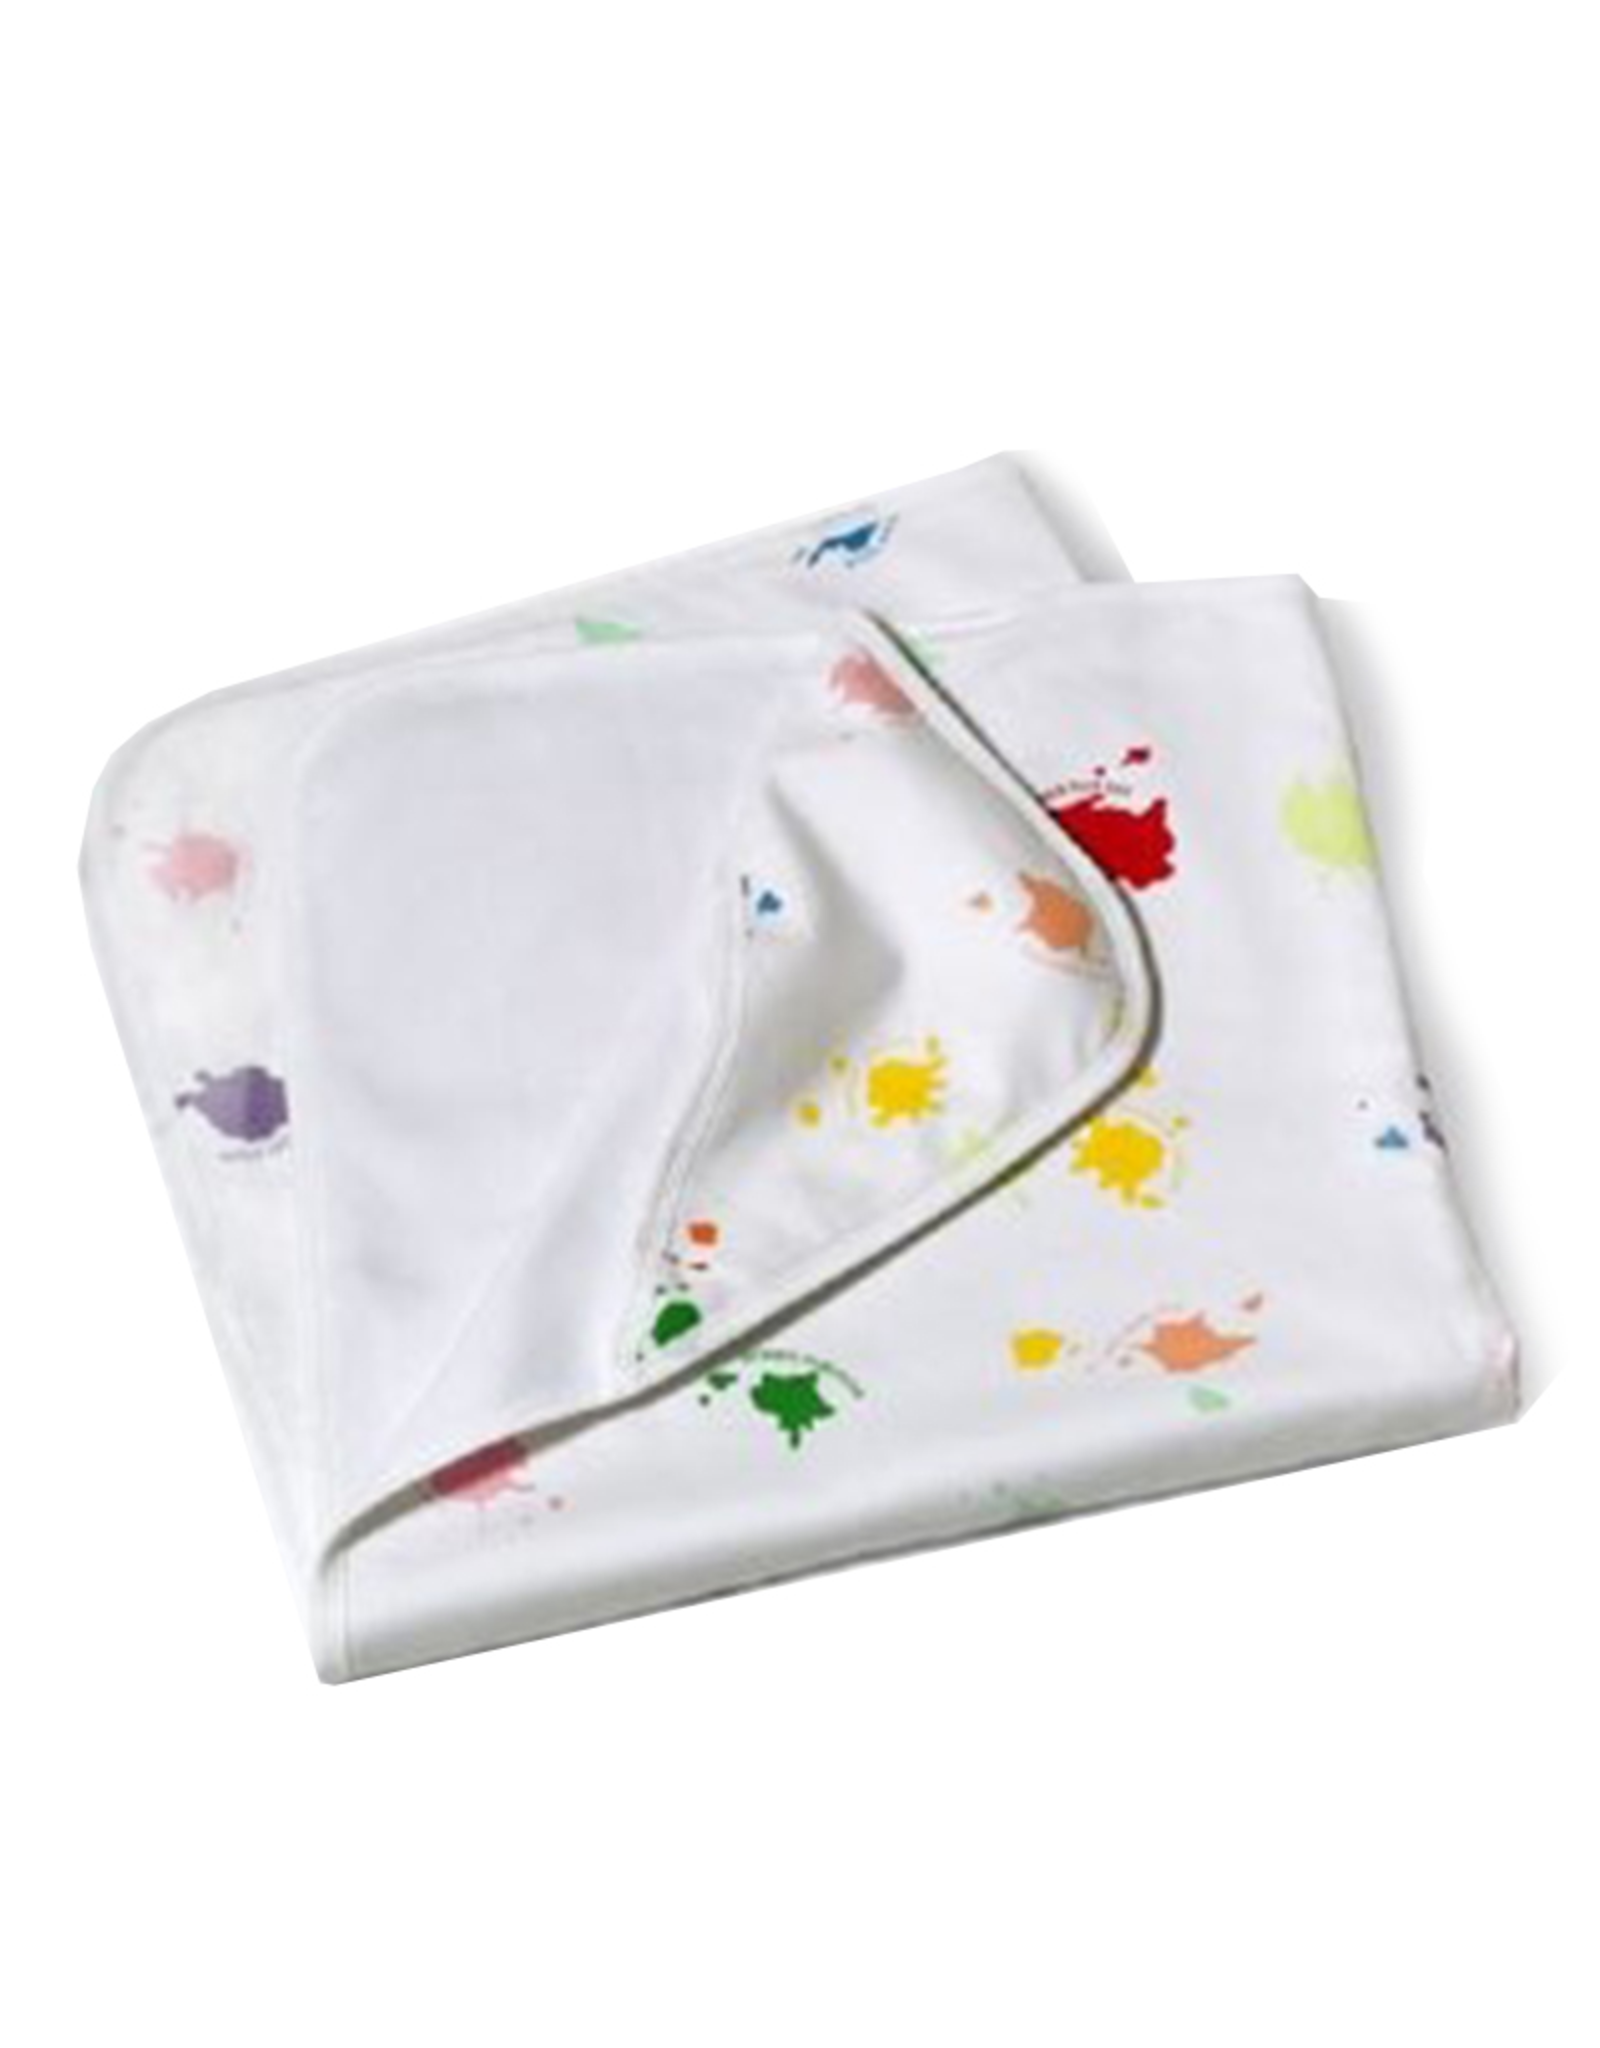 Paint Rags Hooded Cotton Baby Blanket w Colored Paint Daubs